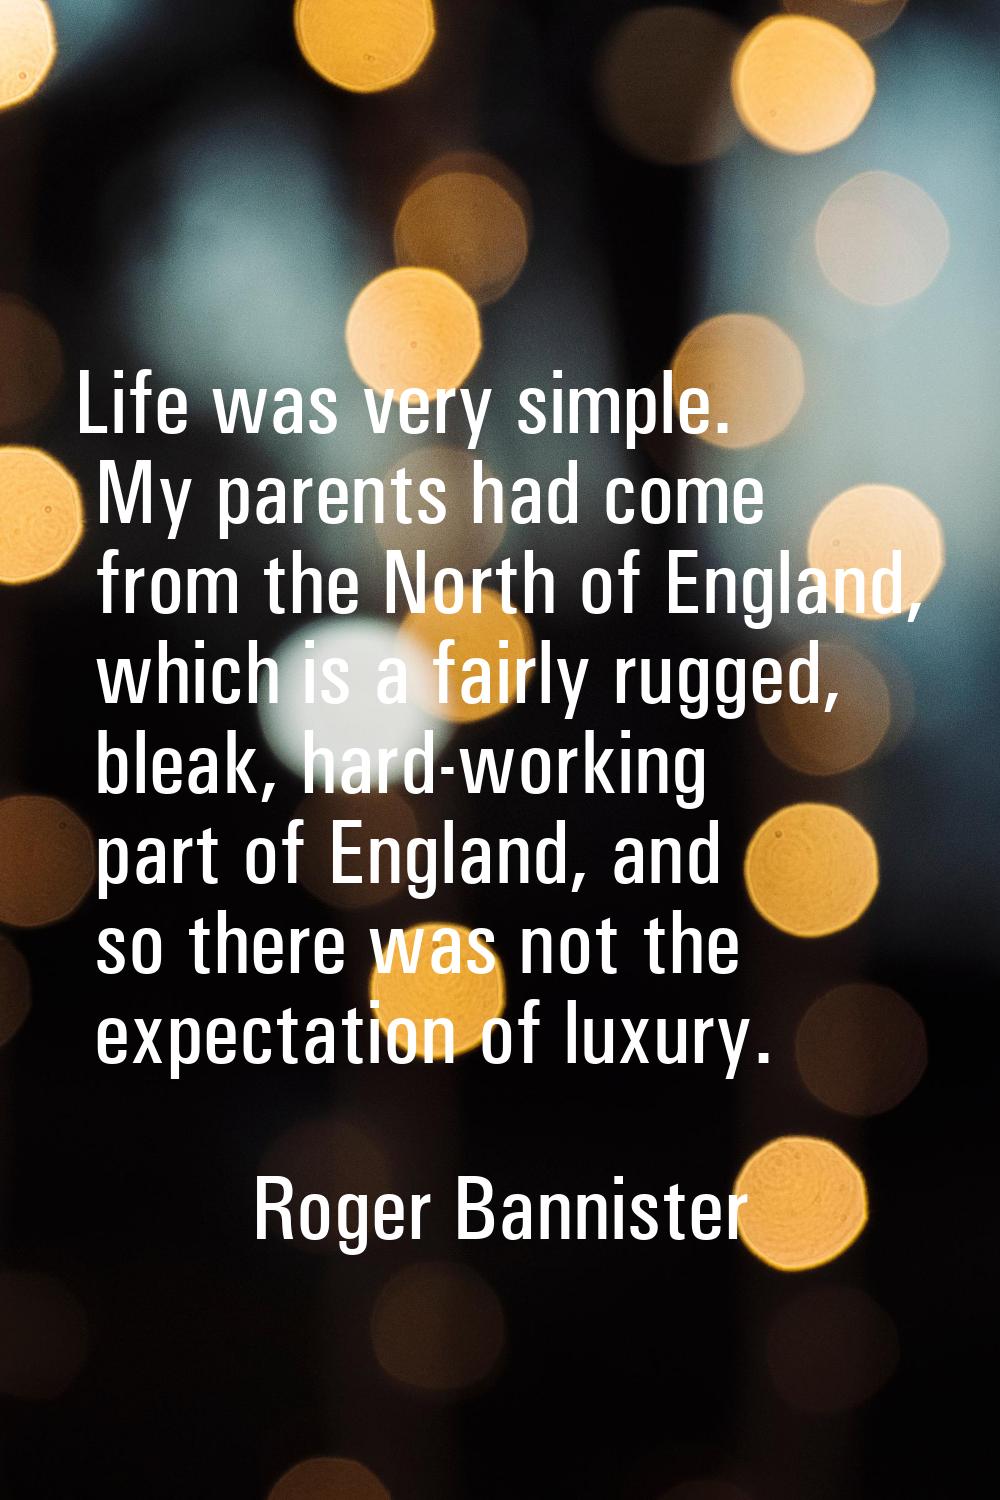 Life was very simple. My parents had come from the North of England, which is a fairly rugged, blea